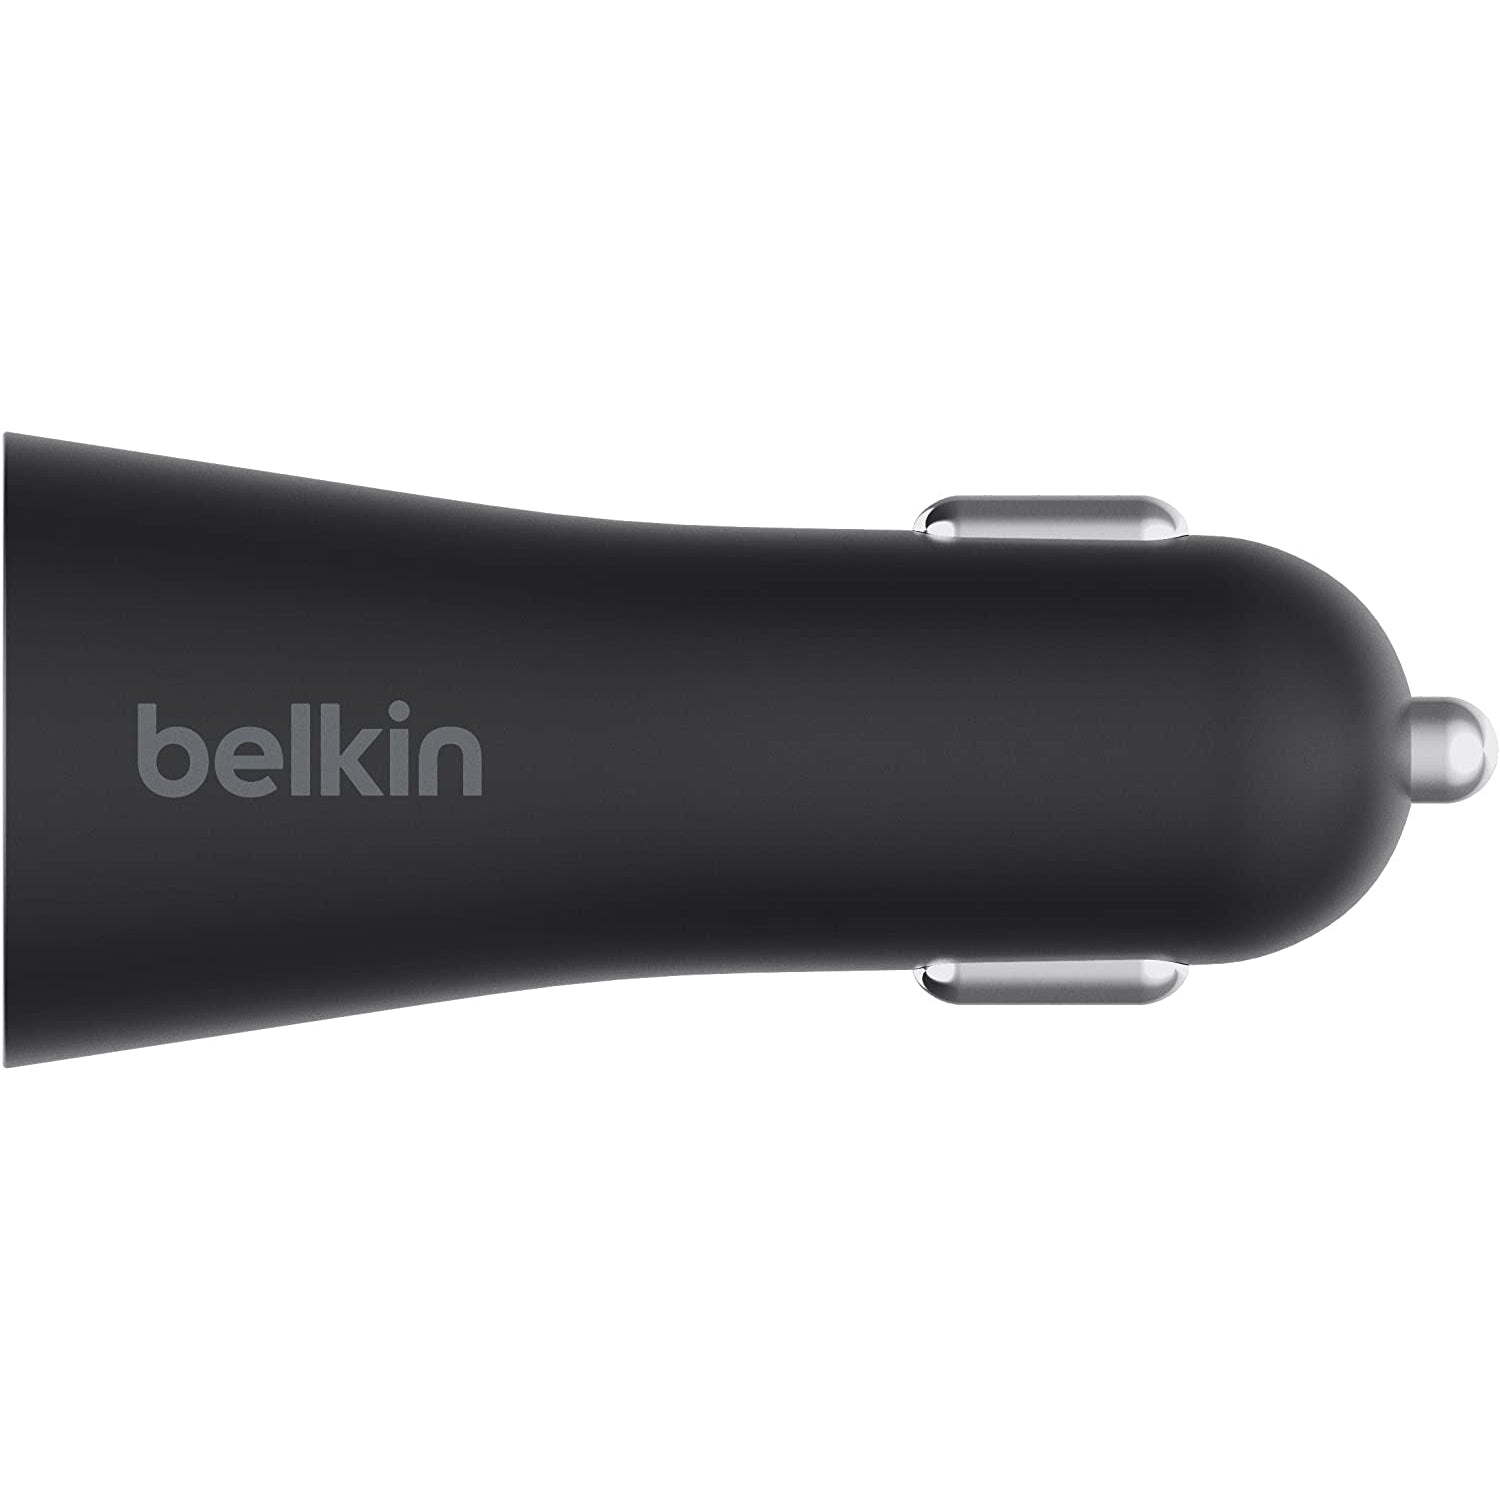 Belkin Car Charger & USB-C Cable - Black